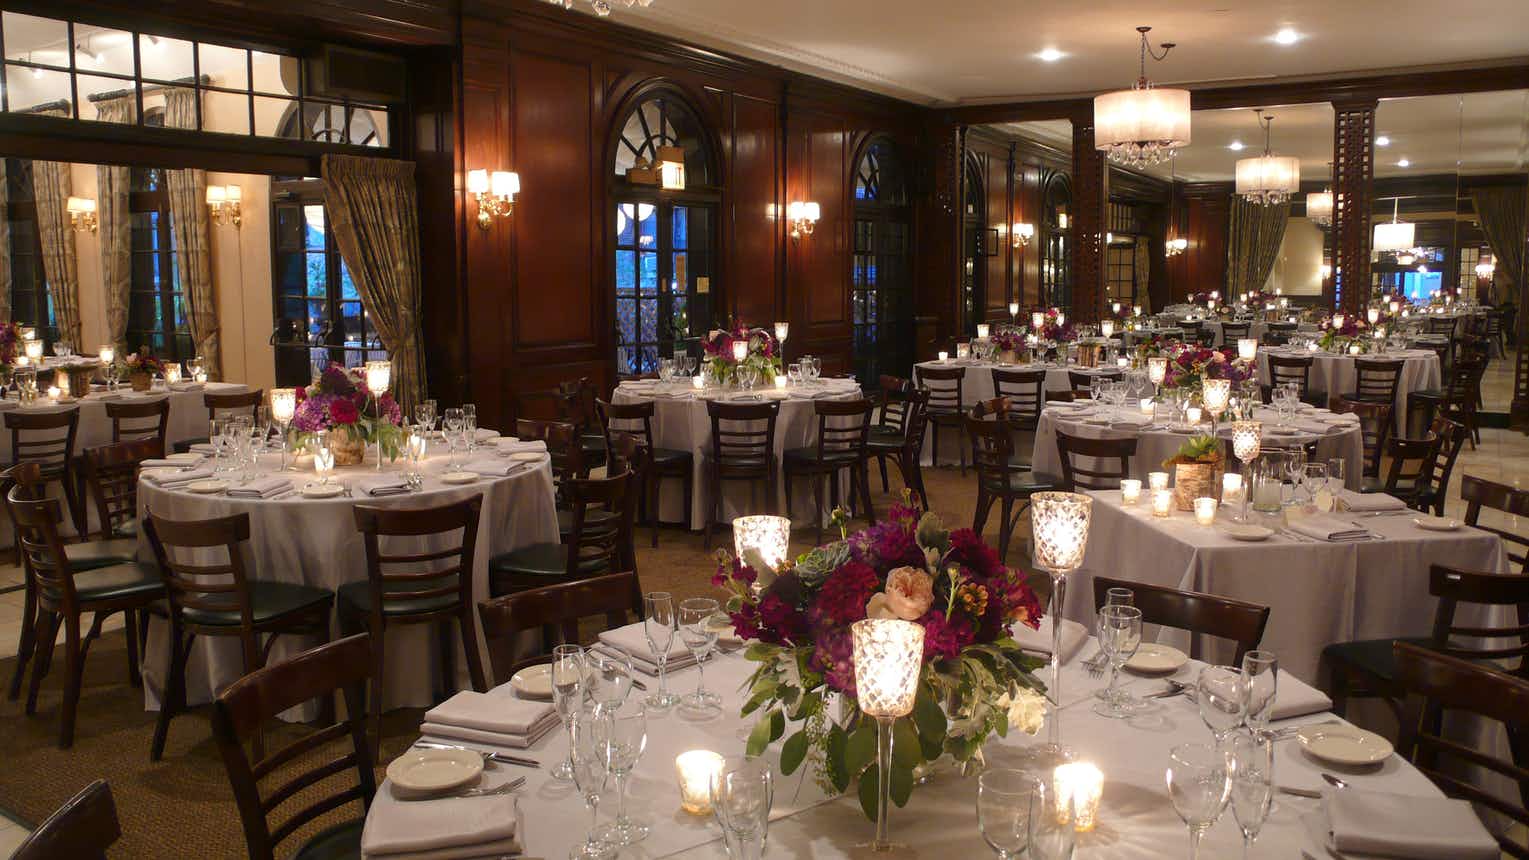 Weddings: 9 Expensive Wedding Venues Around the Country